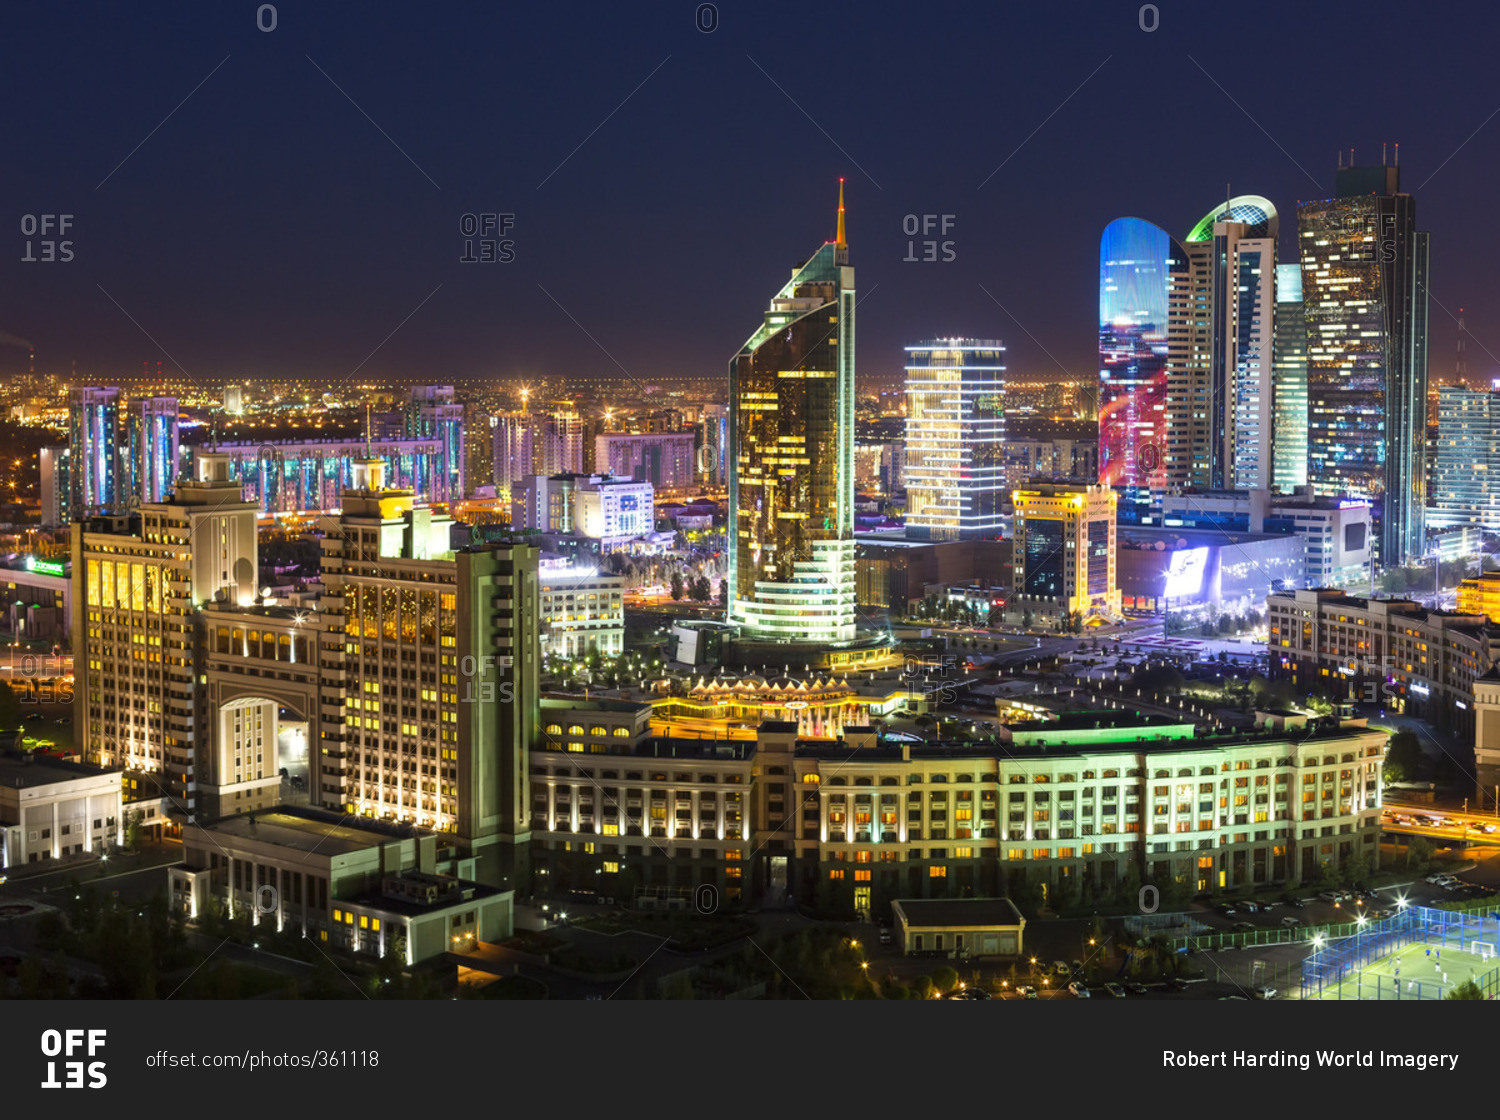 Central Asia, Kazakhstan, Astana, the city center and central business district